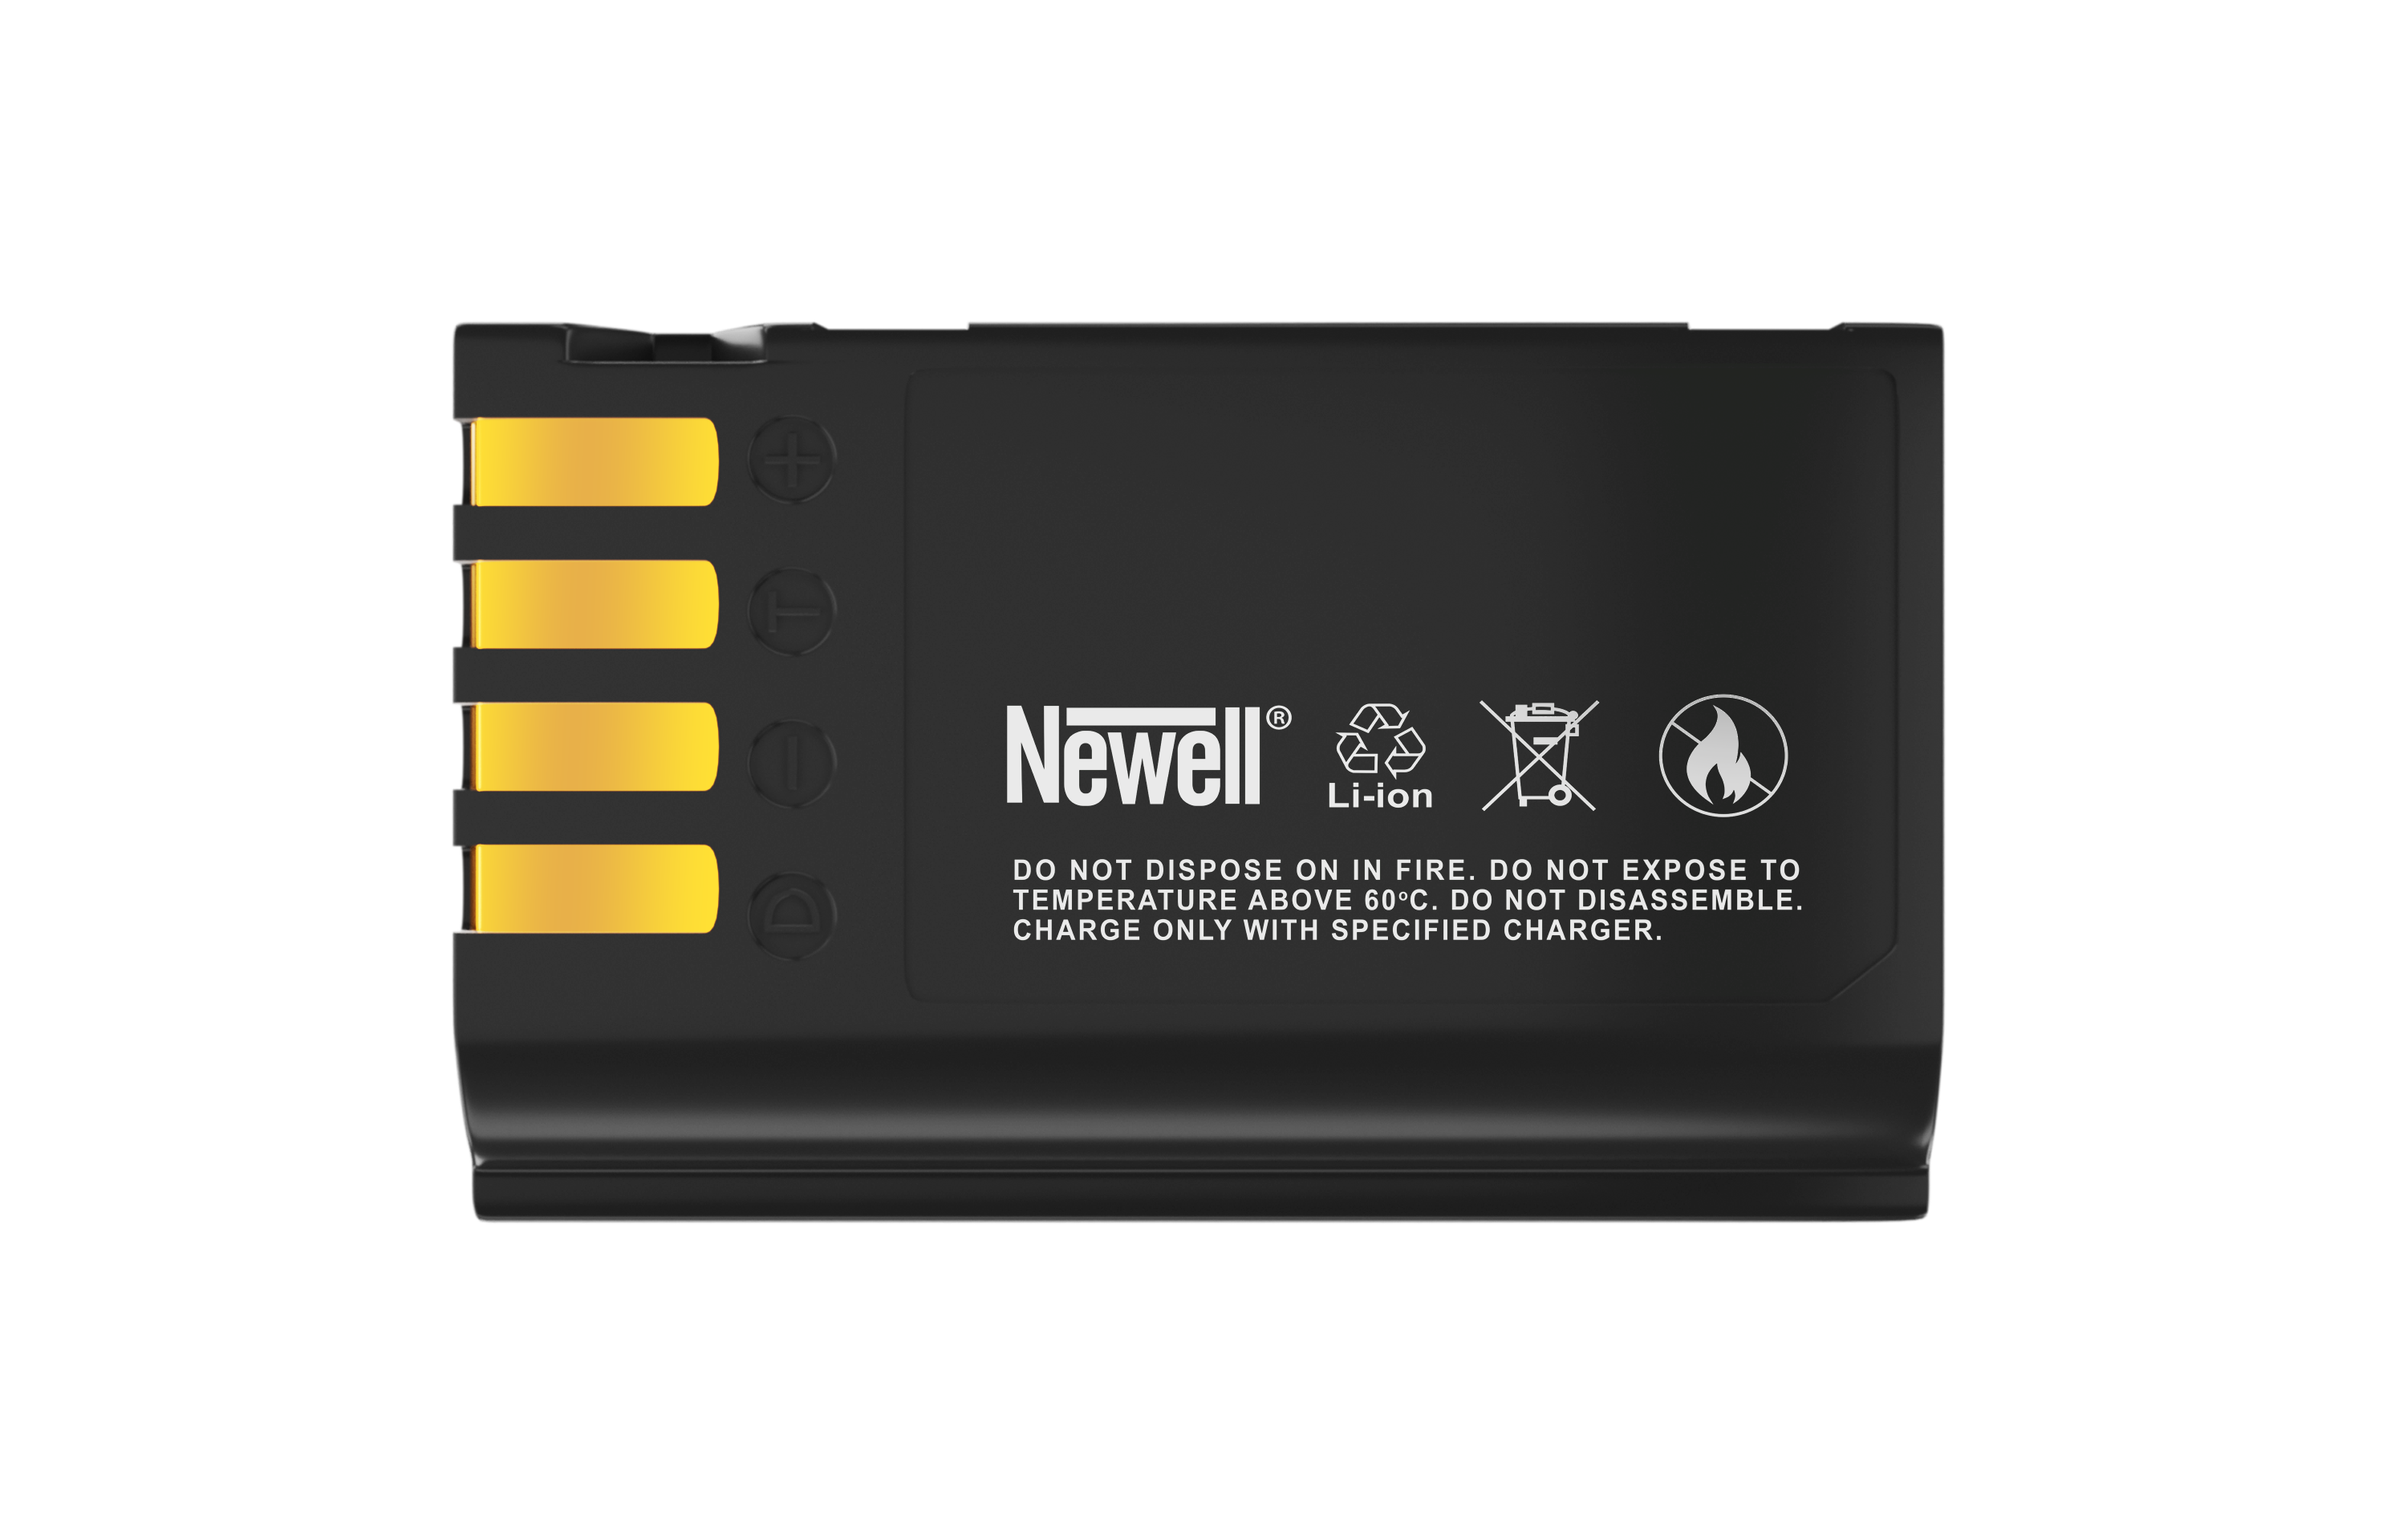 Newell rechargeable battery DMW-BLK22